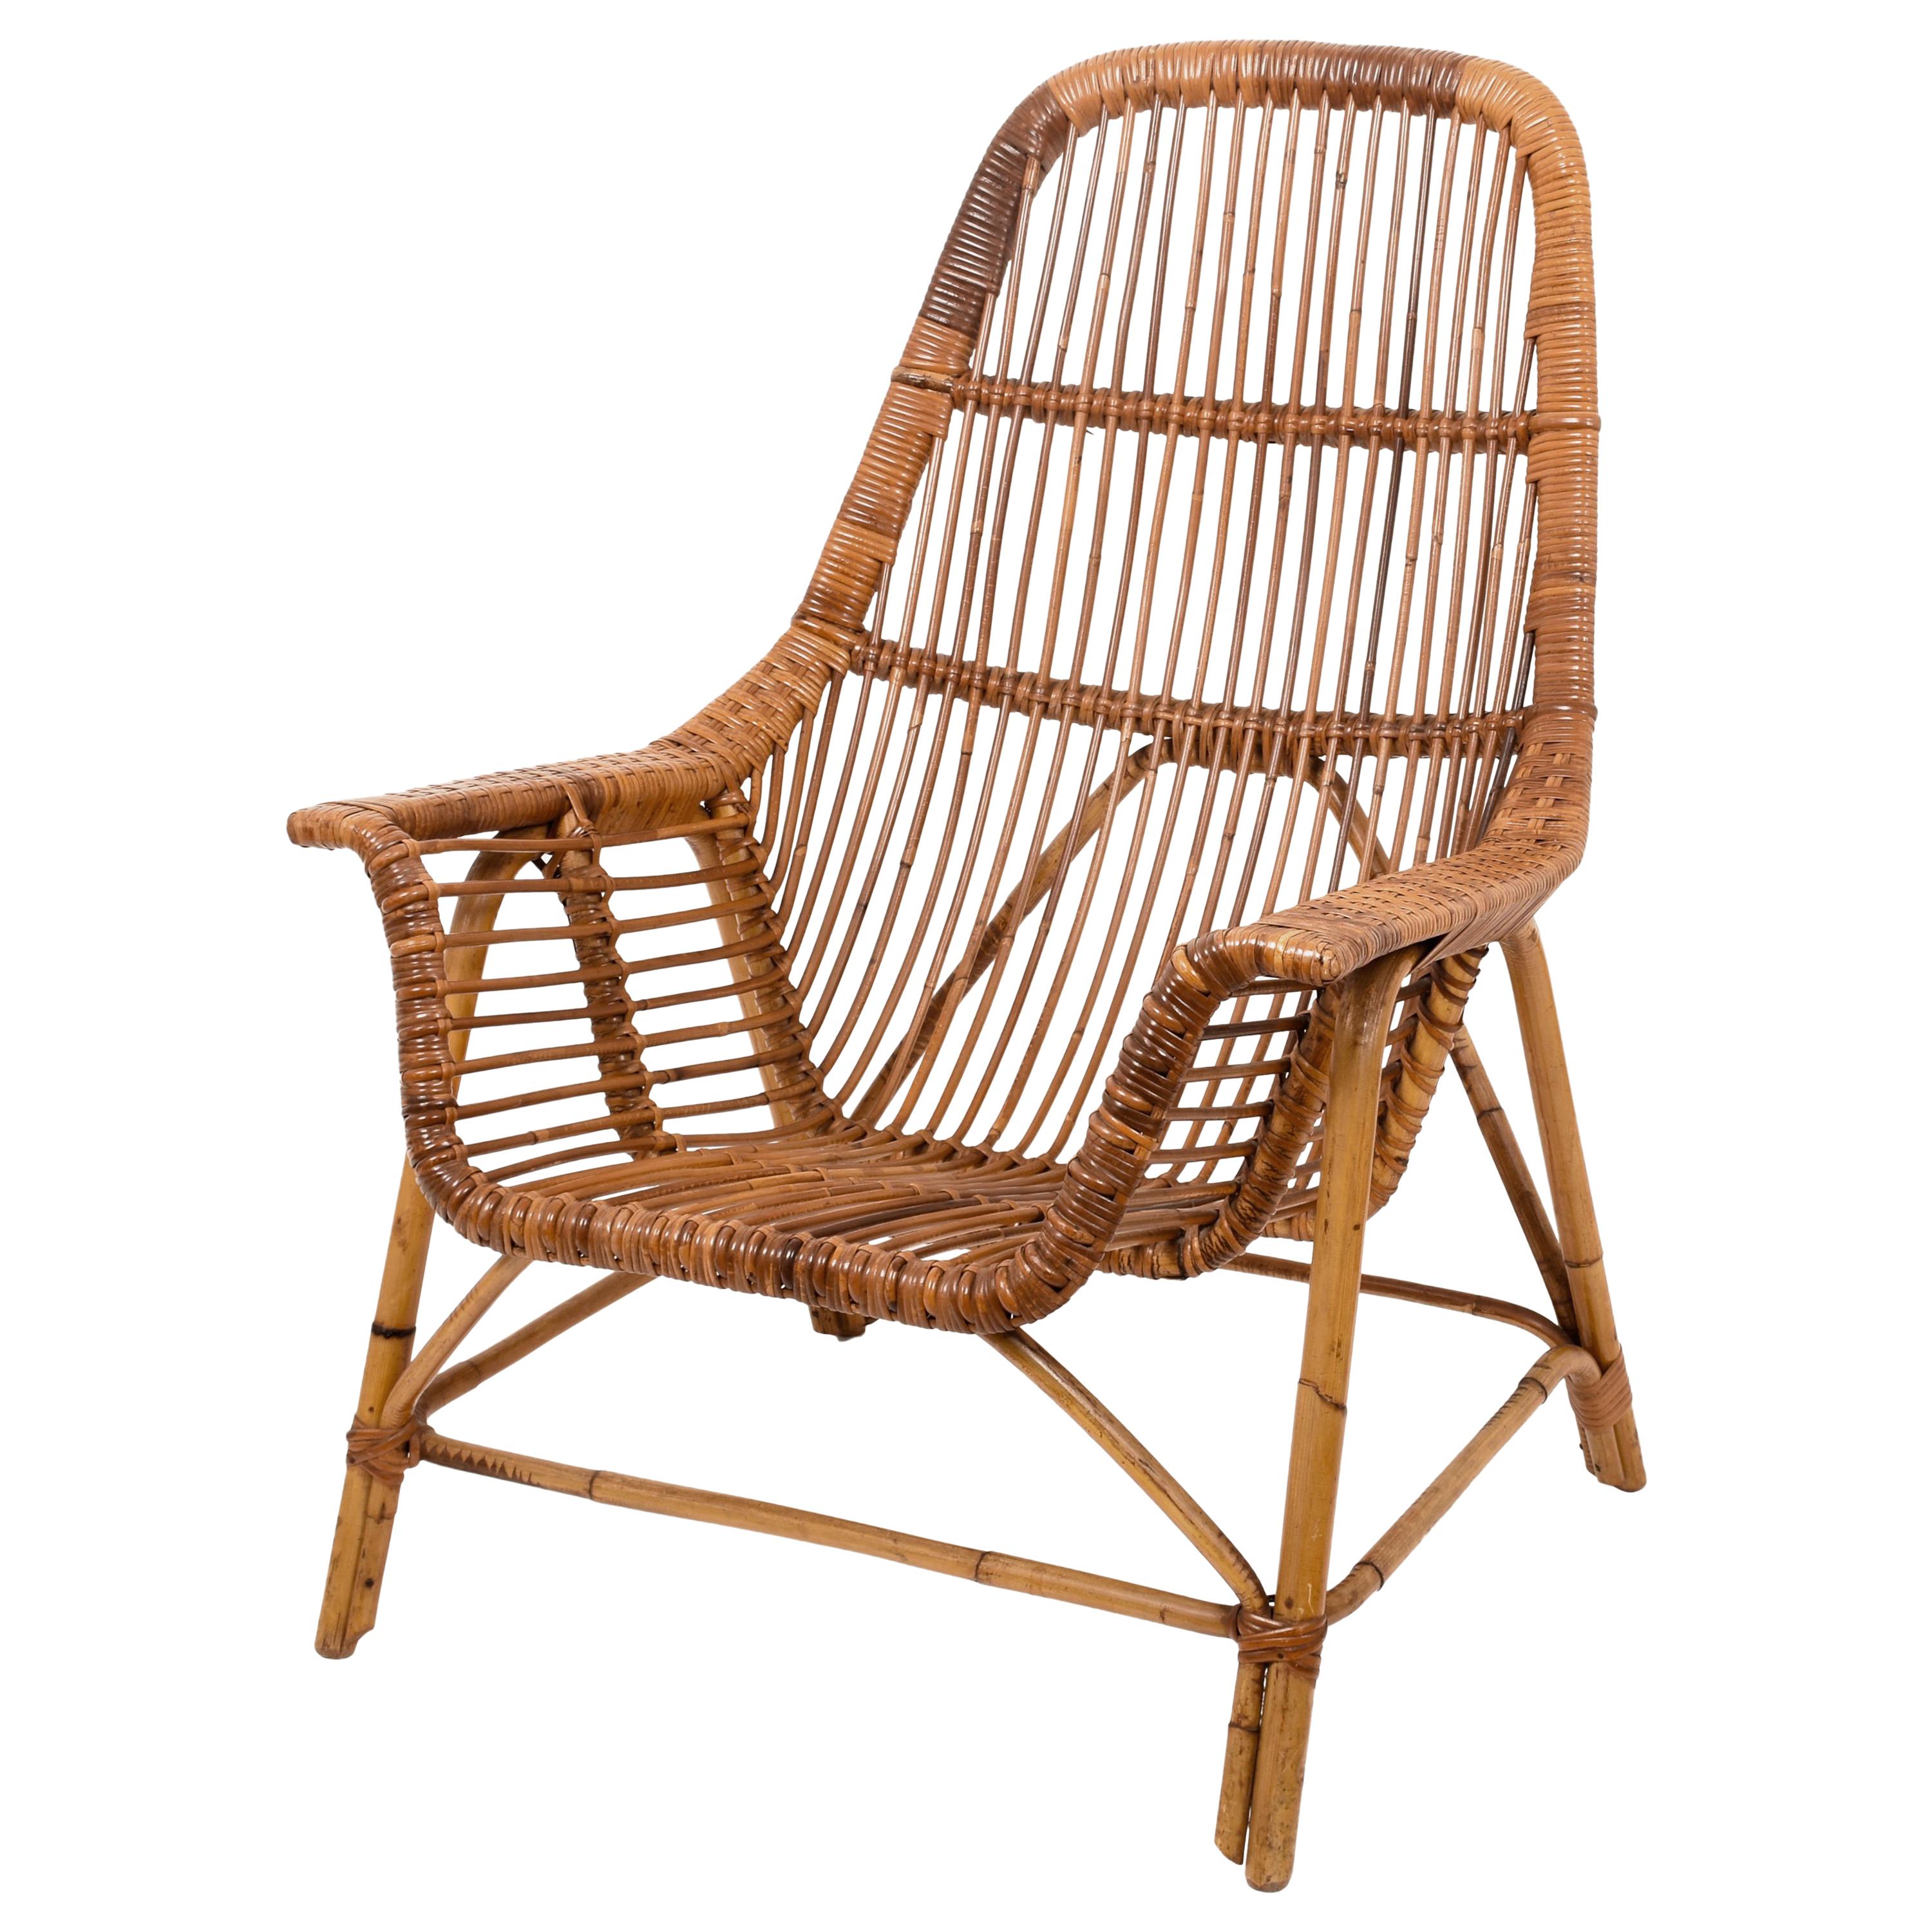 Rattan armchair by George Coslin for Gervasoni.
Rattan armchair, by George Coslin for Gervasoni in excellent condition.
Year 1956 from Italy.